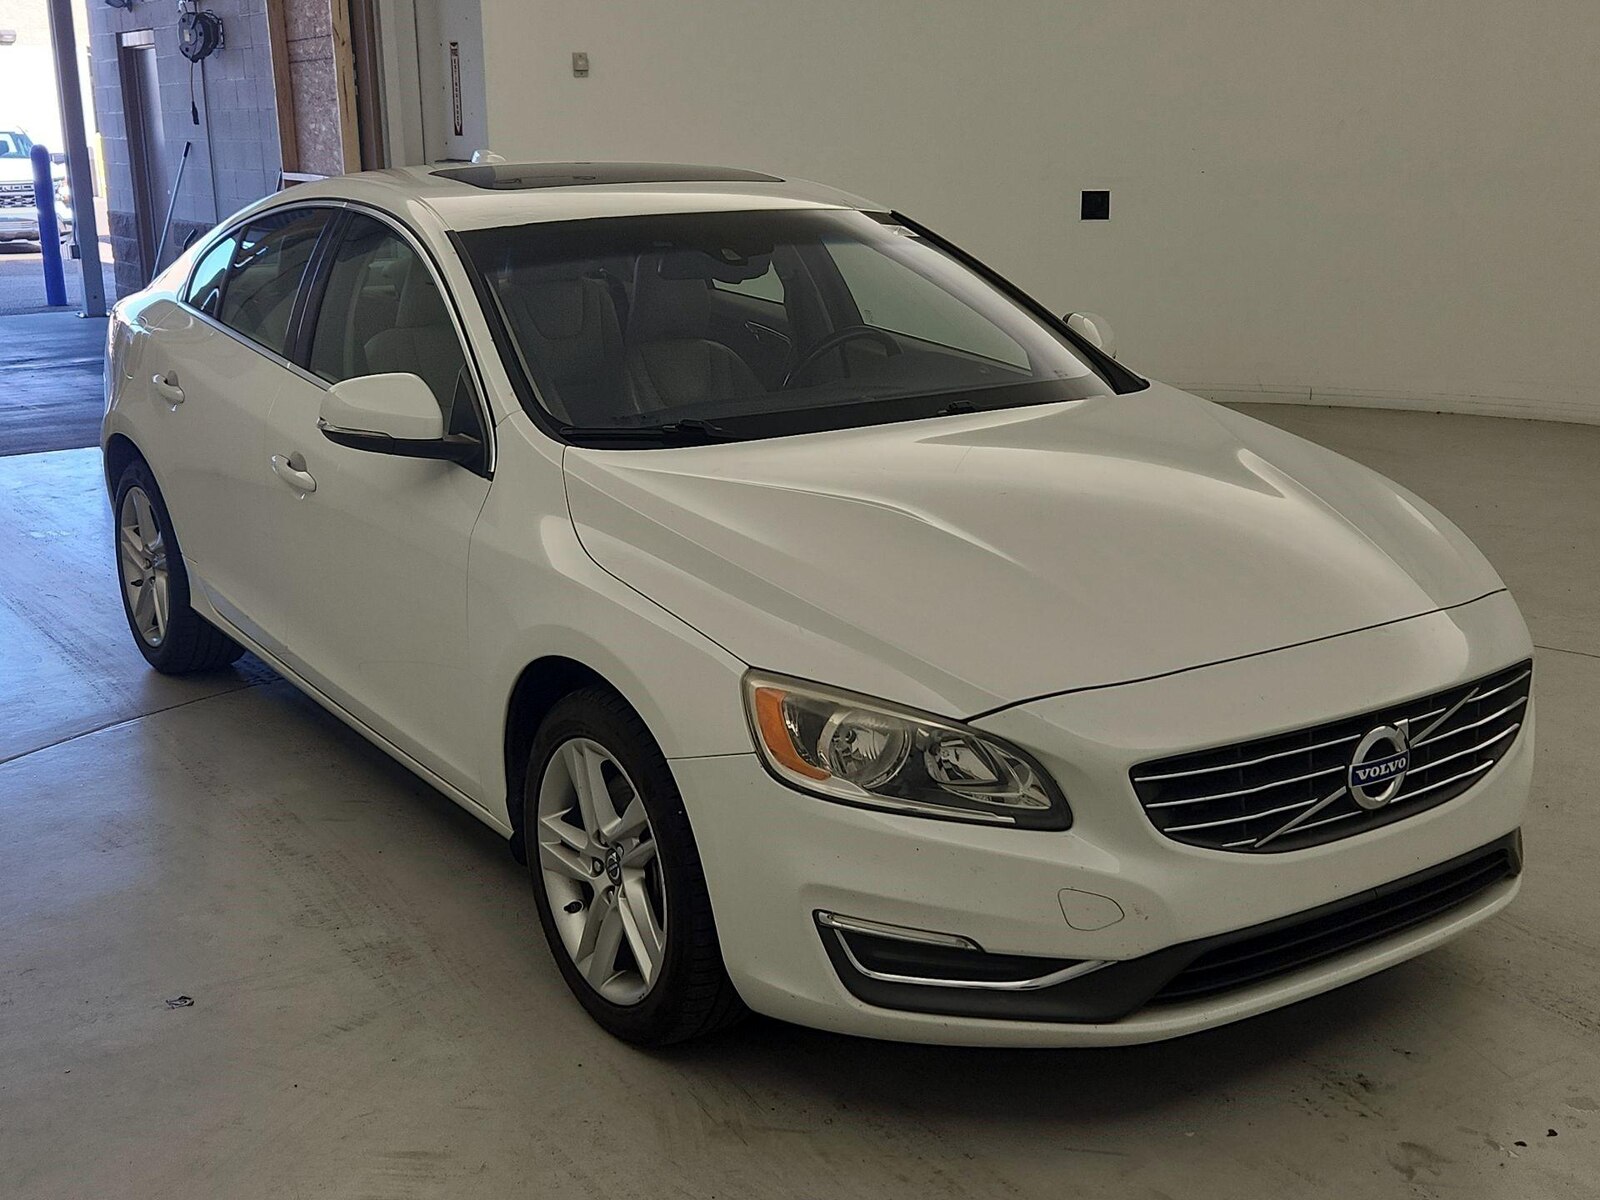 Used 2014 Volvo S60 T5 with VIN YV1612FS7E1292530 for sale in Spokane Valley, WA